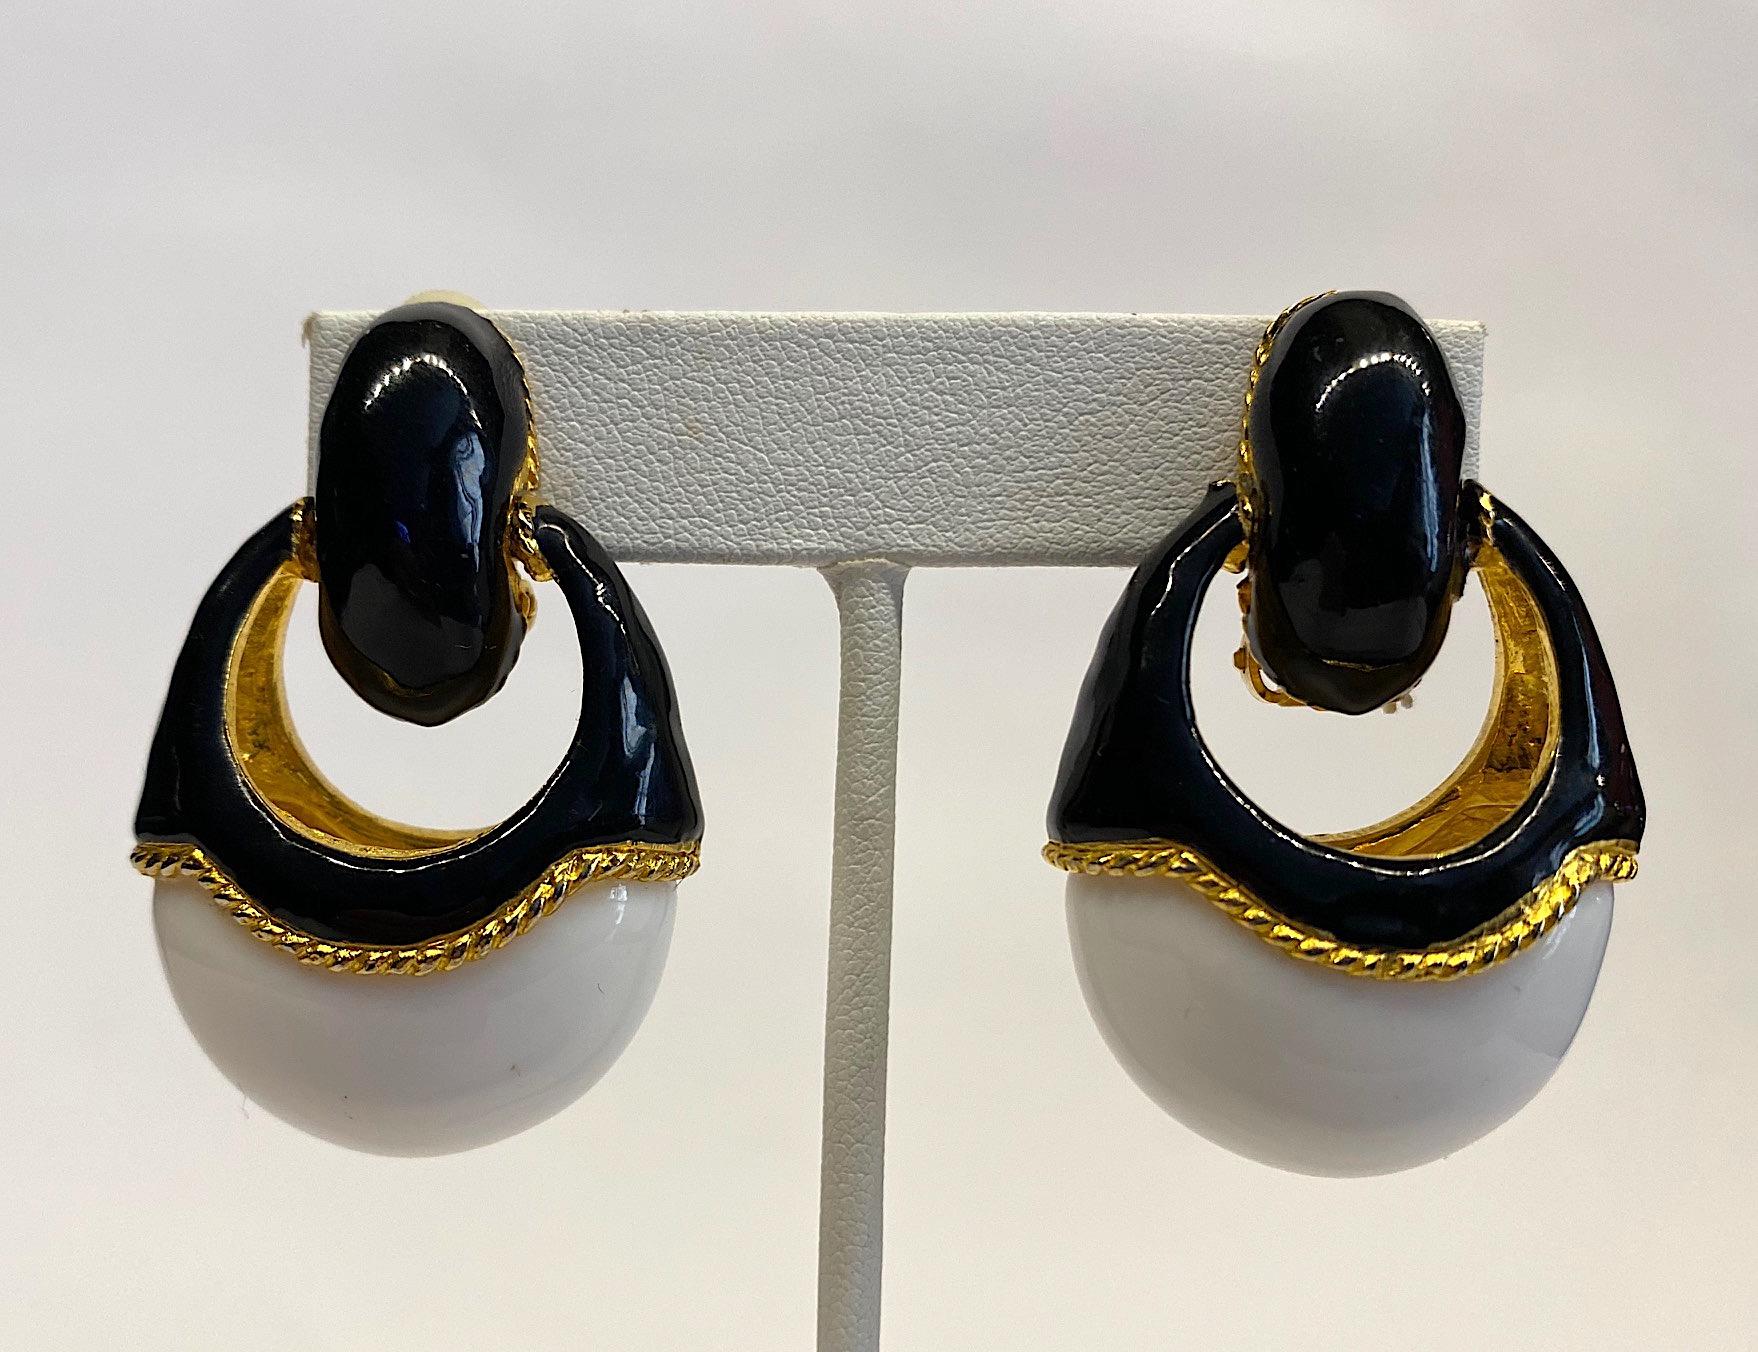 A stylish and chic pair of late 1980s door knocker style dangle earrings. Each clip earring is gold plated with black enamel on top and a large oval white lucite cabochon set into the bottom. The interior of the earrings and rope border around the